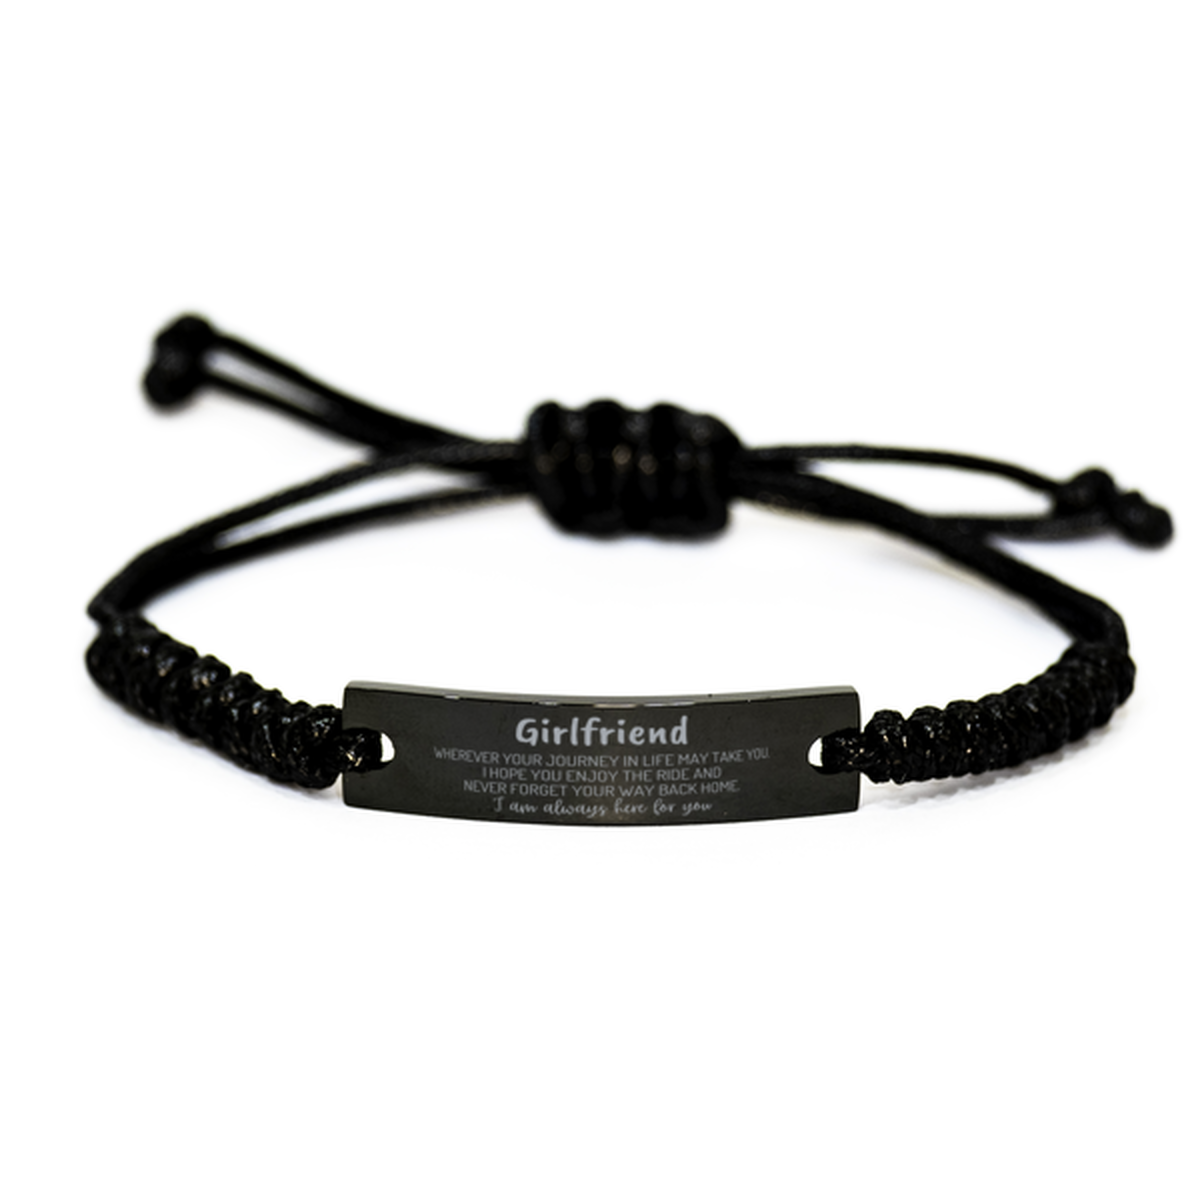 Girlfriend wherever your journey in life may take you, I am always here for you Girlfriend Black Rope Bracelet, Awesome Christmas Gifts For Girlfriend, Girlfriend Birthday Gifts for Men Women Family Loved One